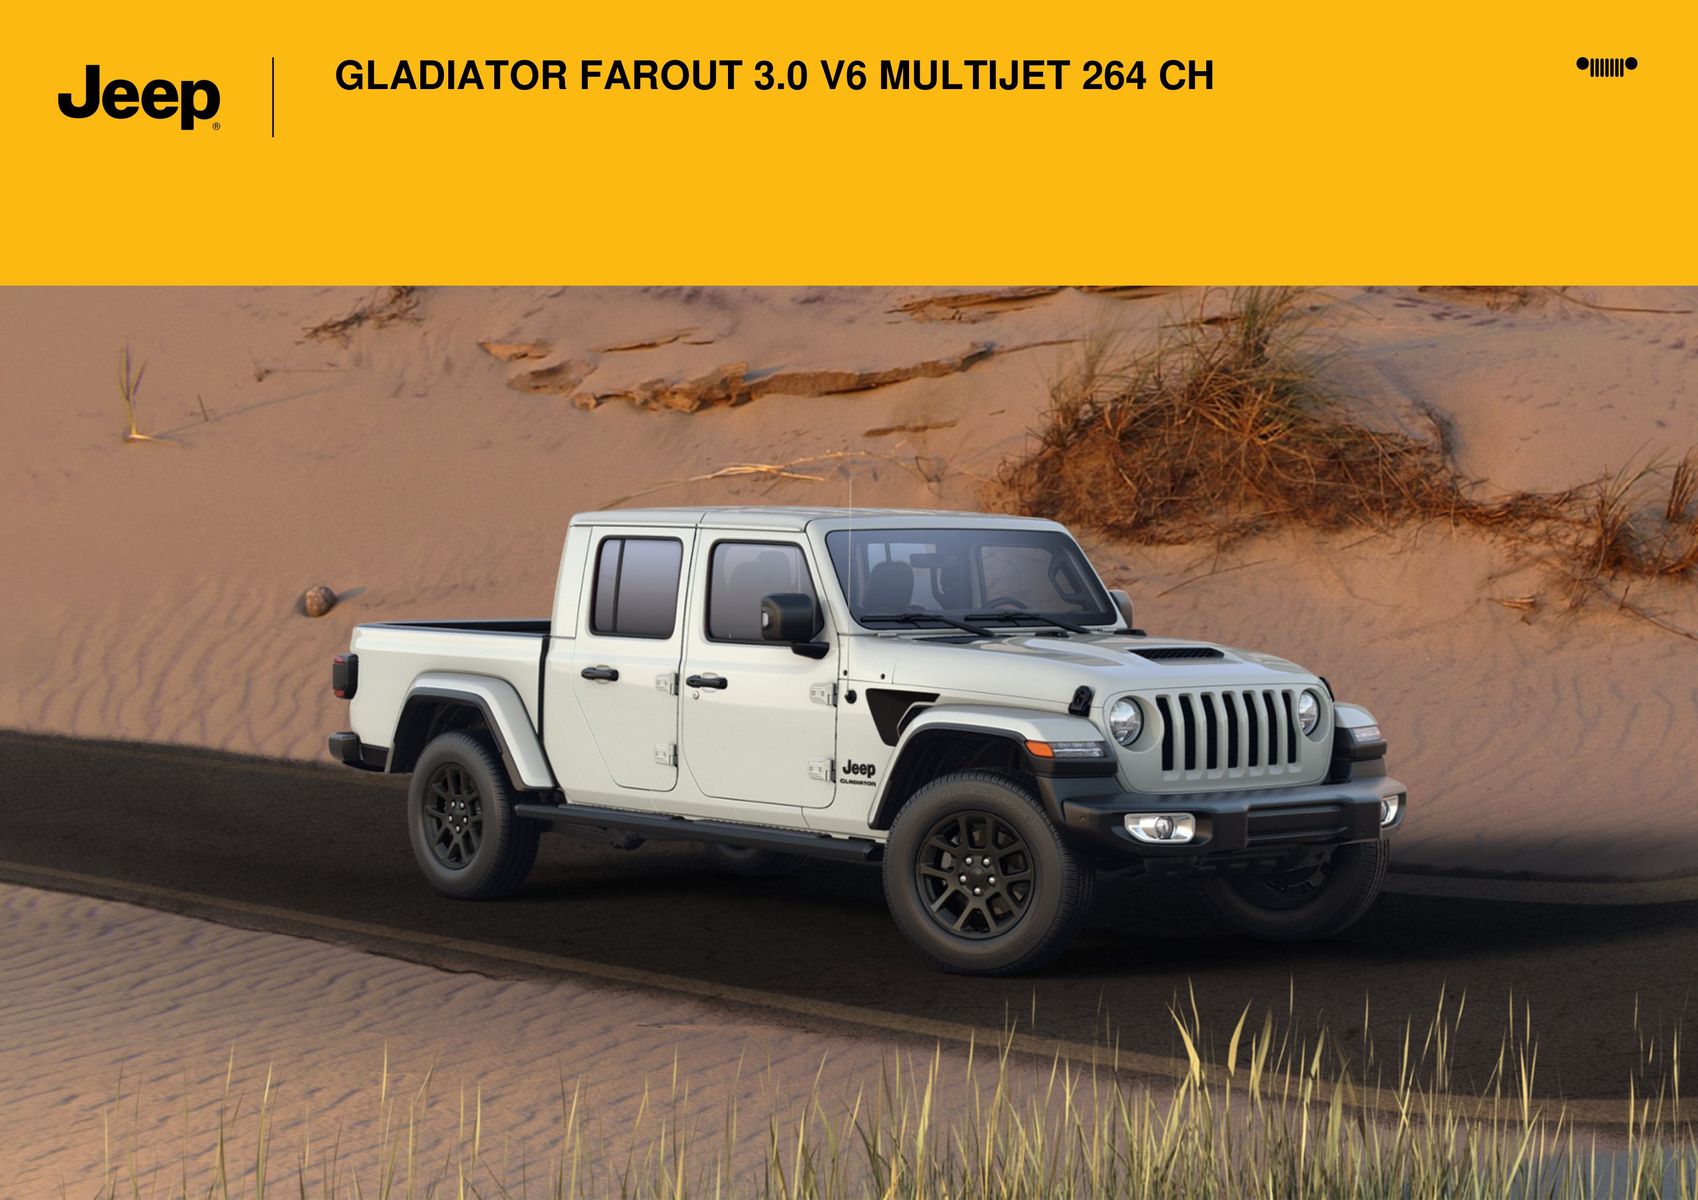 Catalogue GLADIATOR FAROUT 3.0 V6 MULTIJET 264 CH, page 00001